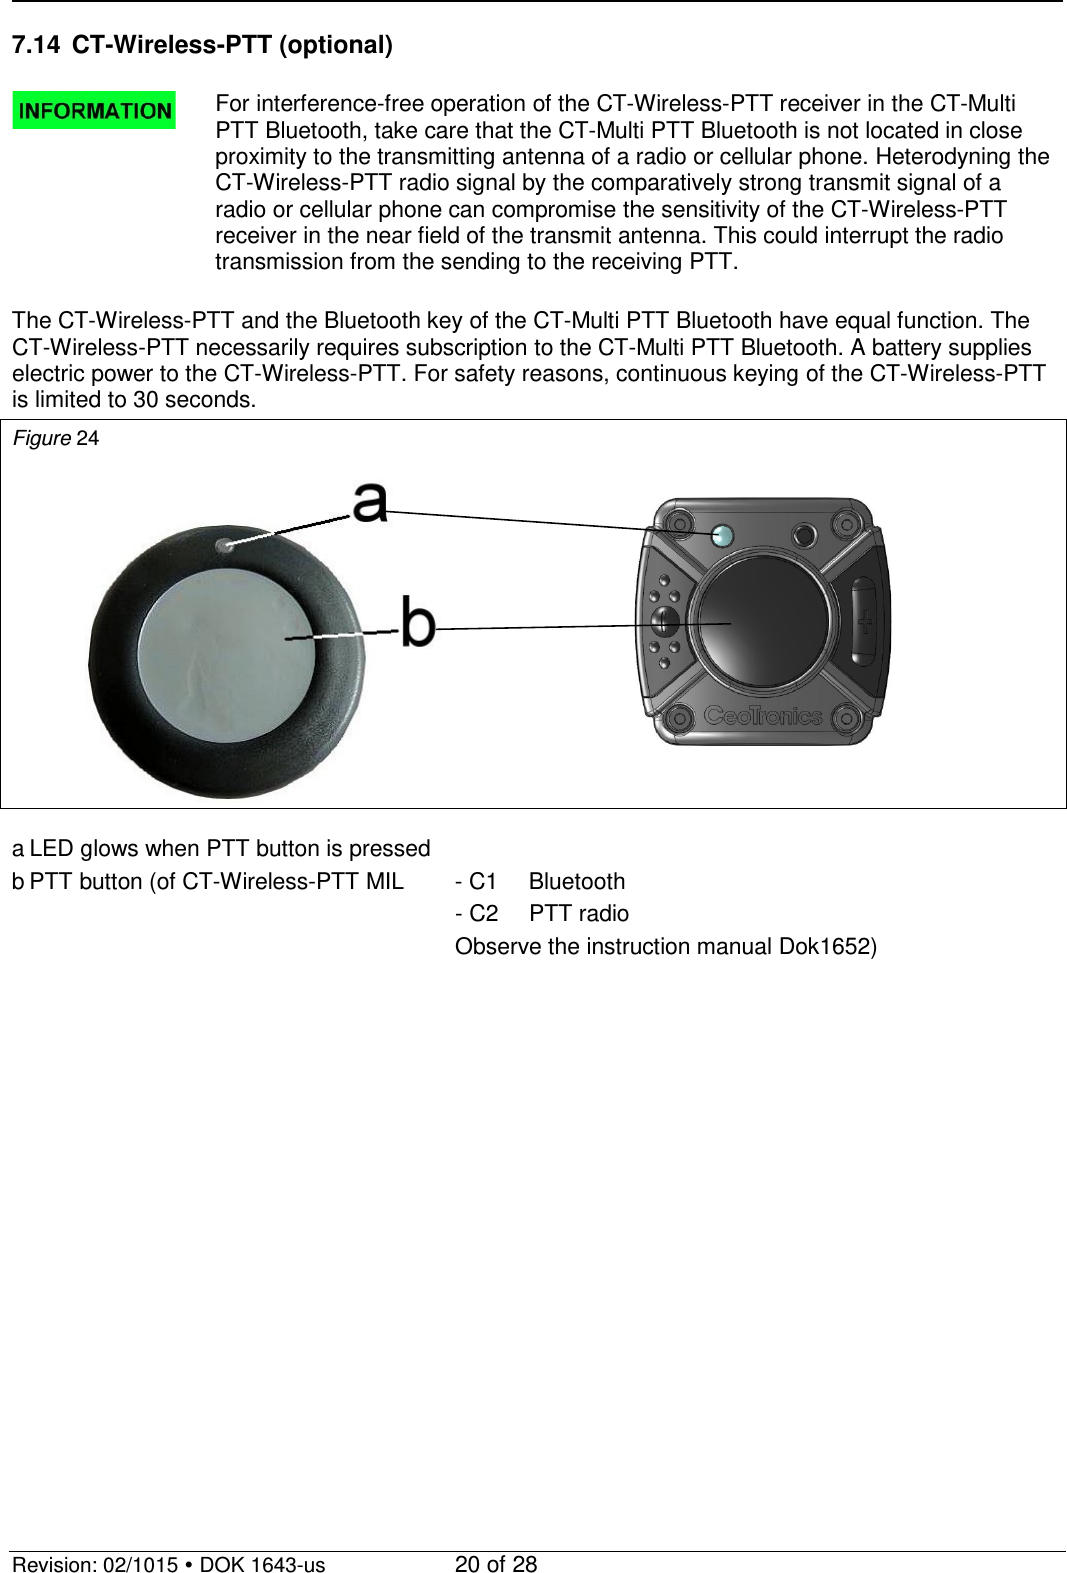   Revision: 02/1015  DOK 1643-us    20 of 28 7.14 CT-Wireless-PTT (optional)   For interference-free operation of the CT-Wireless-PTT receiver in the CT-Multi PTT Bluetooth, take care that the CT-Multi PTT Bluetooth is not located in close proximity to the transmitting antenna of a radio or cellular phone. Heterodyning the CT-Wireless-PTT radio signal by the comparatively strong transmit signal of a radio or cellular phone can compromise the sensitivity of the CT-Wireless-PTT receiver in the near field of the transmit antenna. This could interrupt the radio transmission from the sending to the receiving PTT.  The CT-Wireless-PTT and the Bluetooth key of the CT-Multi PTT Bluetooth have equal function. The CT-Wireless-PTT necessarily requires subscription to the CT-Multi PTT Bluetooth. A battery supplies electric power to the CT-Wireless-PTT. For safety reasons, continuous keying of the CT-Wireless-PTT is limited to 30 seconds. Figure 24     a LED glows when PTT button is pressed b PTT button (of CT-Wireless-PTT MIL  - C1 Bluetooth             - C2 PTT radio             Observe the instruction manual Dok1652)  